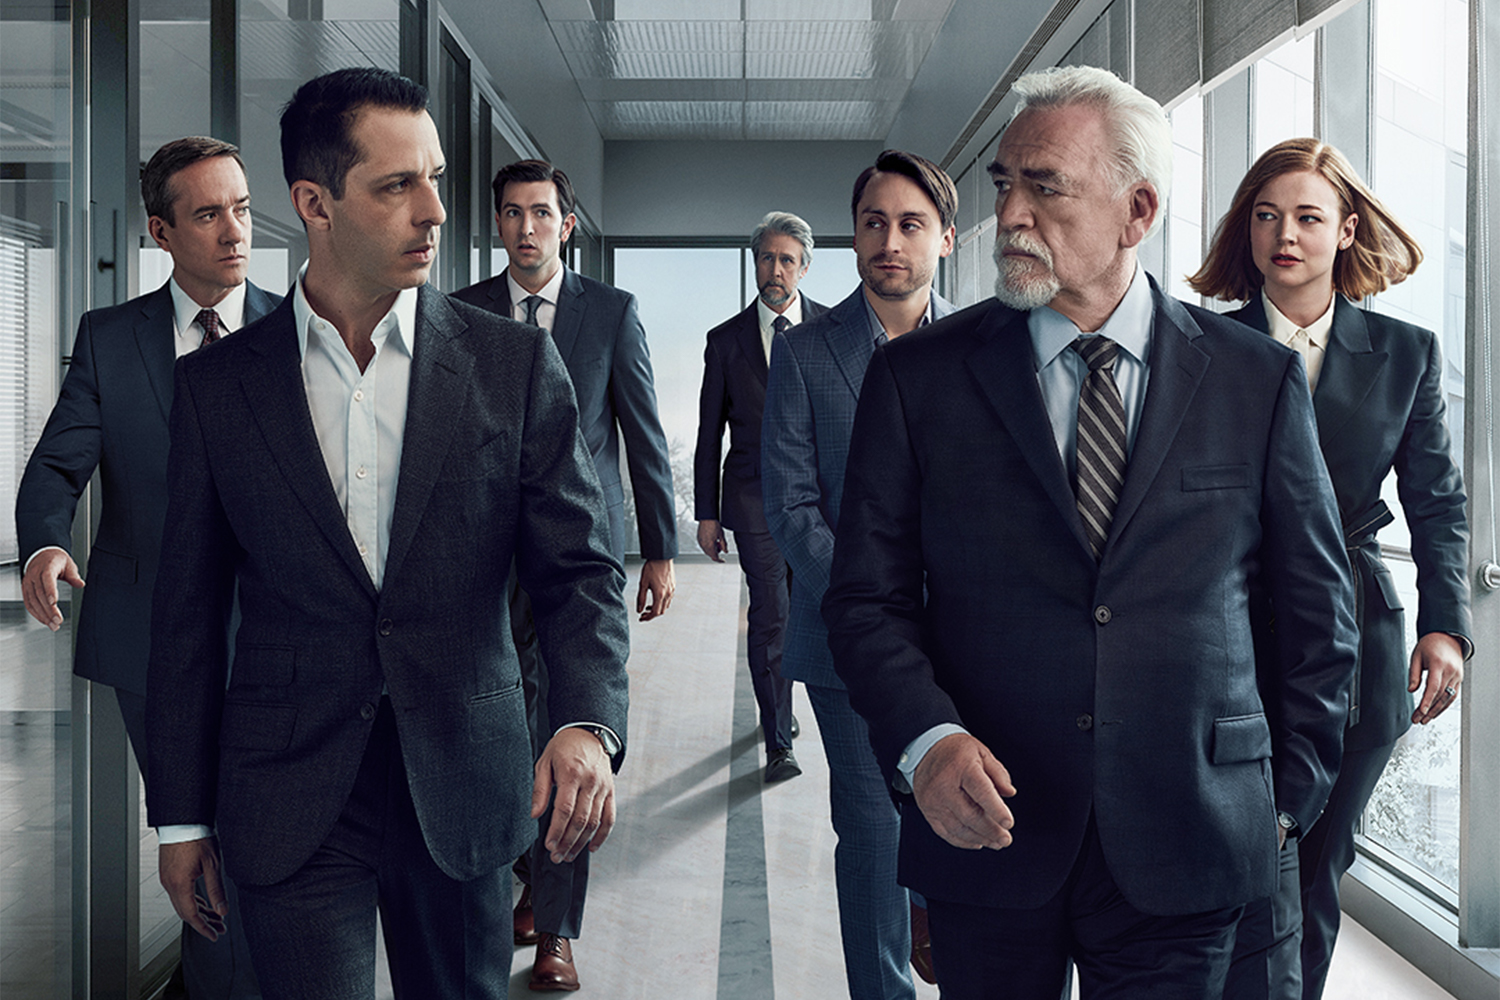 One version of a "Succession" poster for season 3, with the Roy family split up, some behind Kendall, others behind Logan